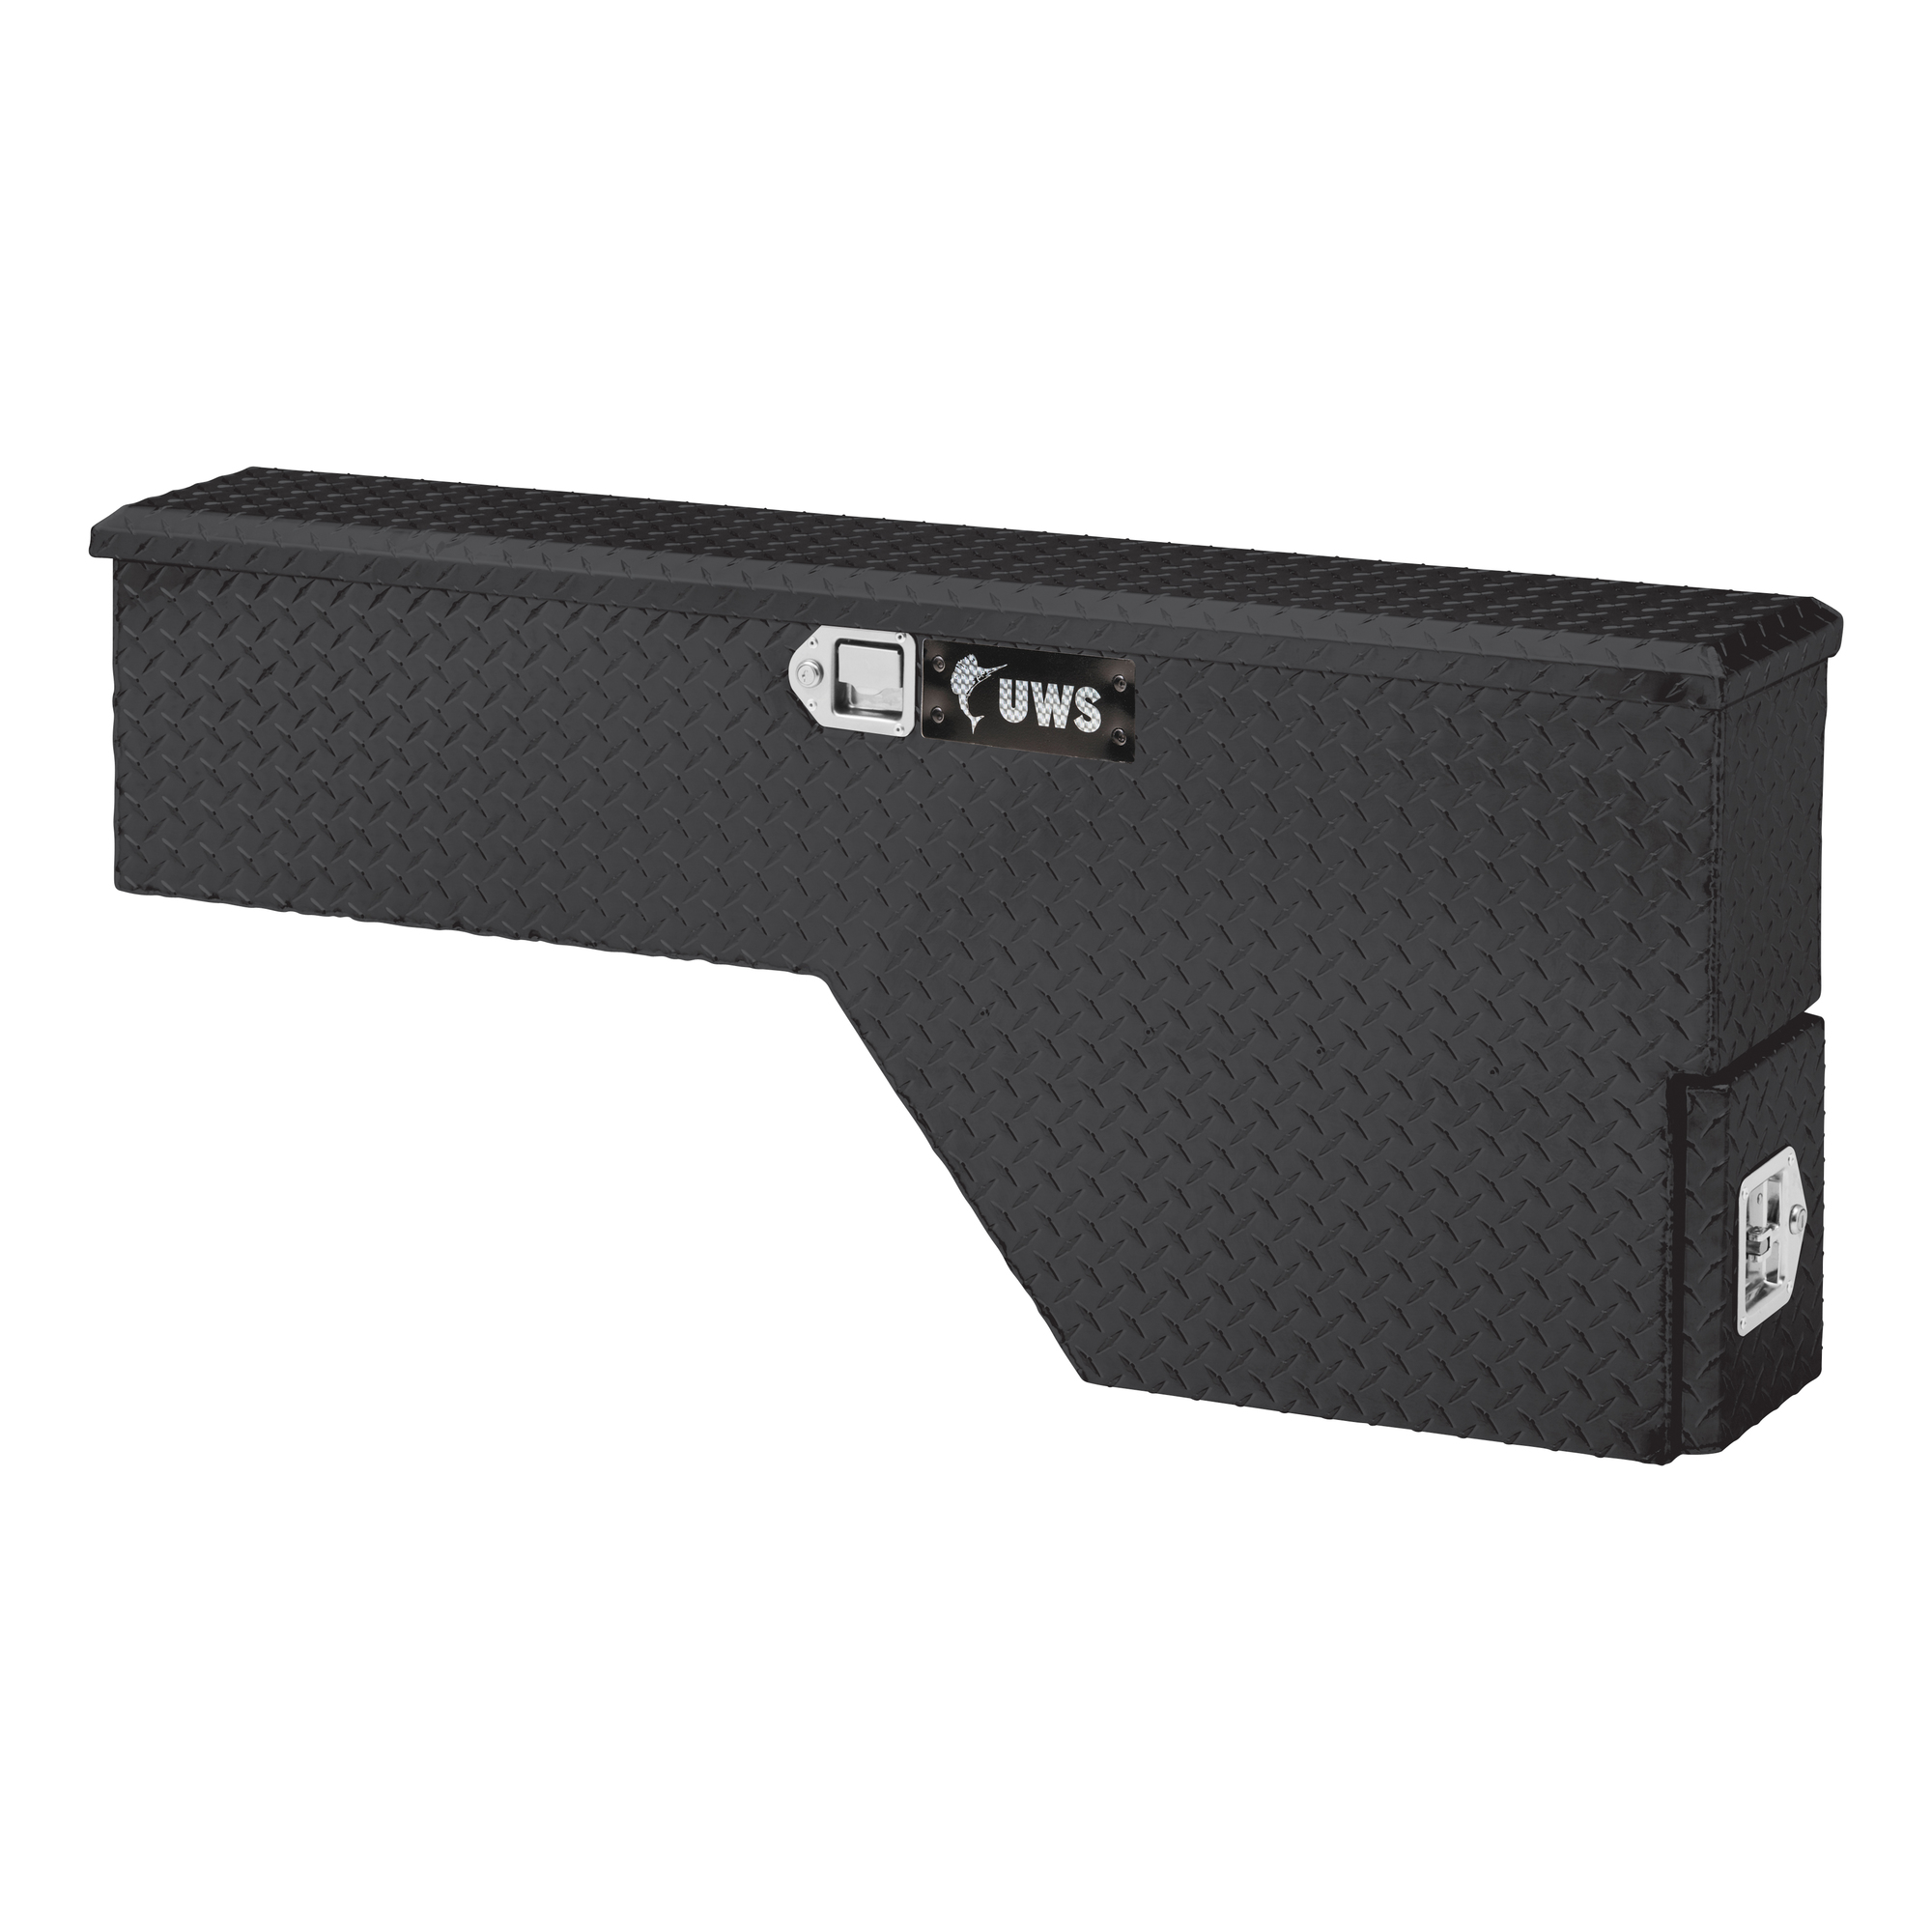 UWS, 48in. Driver-Side Wheel Well Tool Box, Width 48 in, Material Aluminum,  Color Finish Gloss Black, Model# EC30012